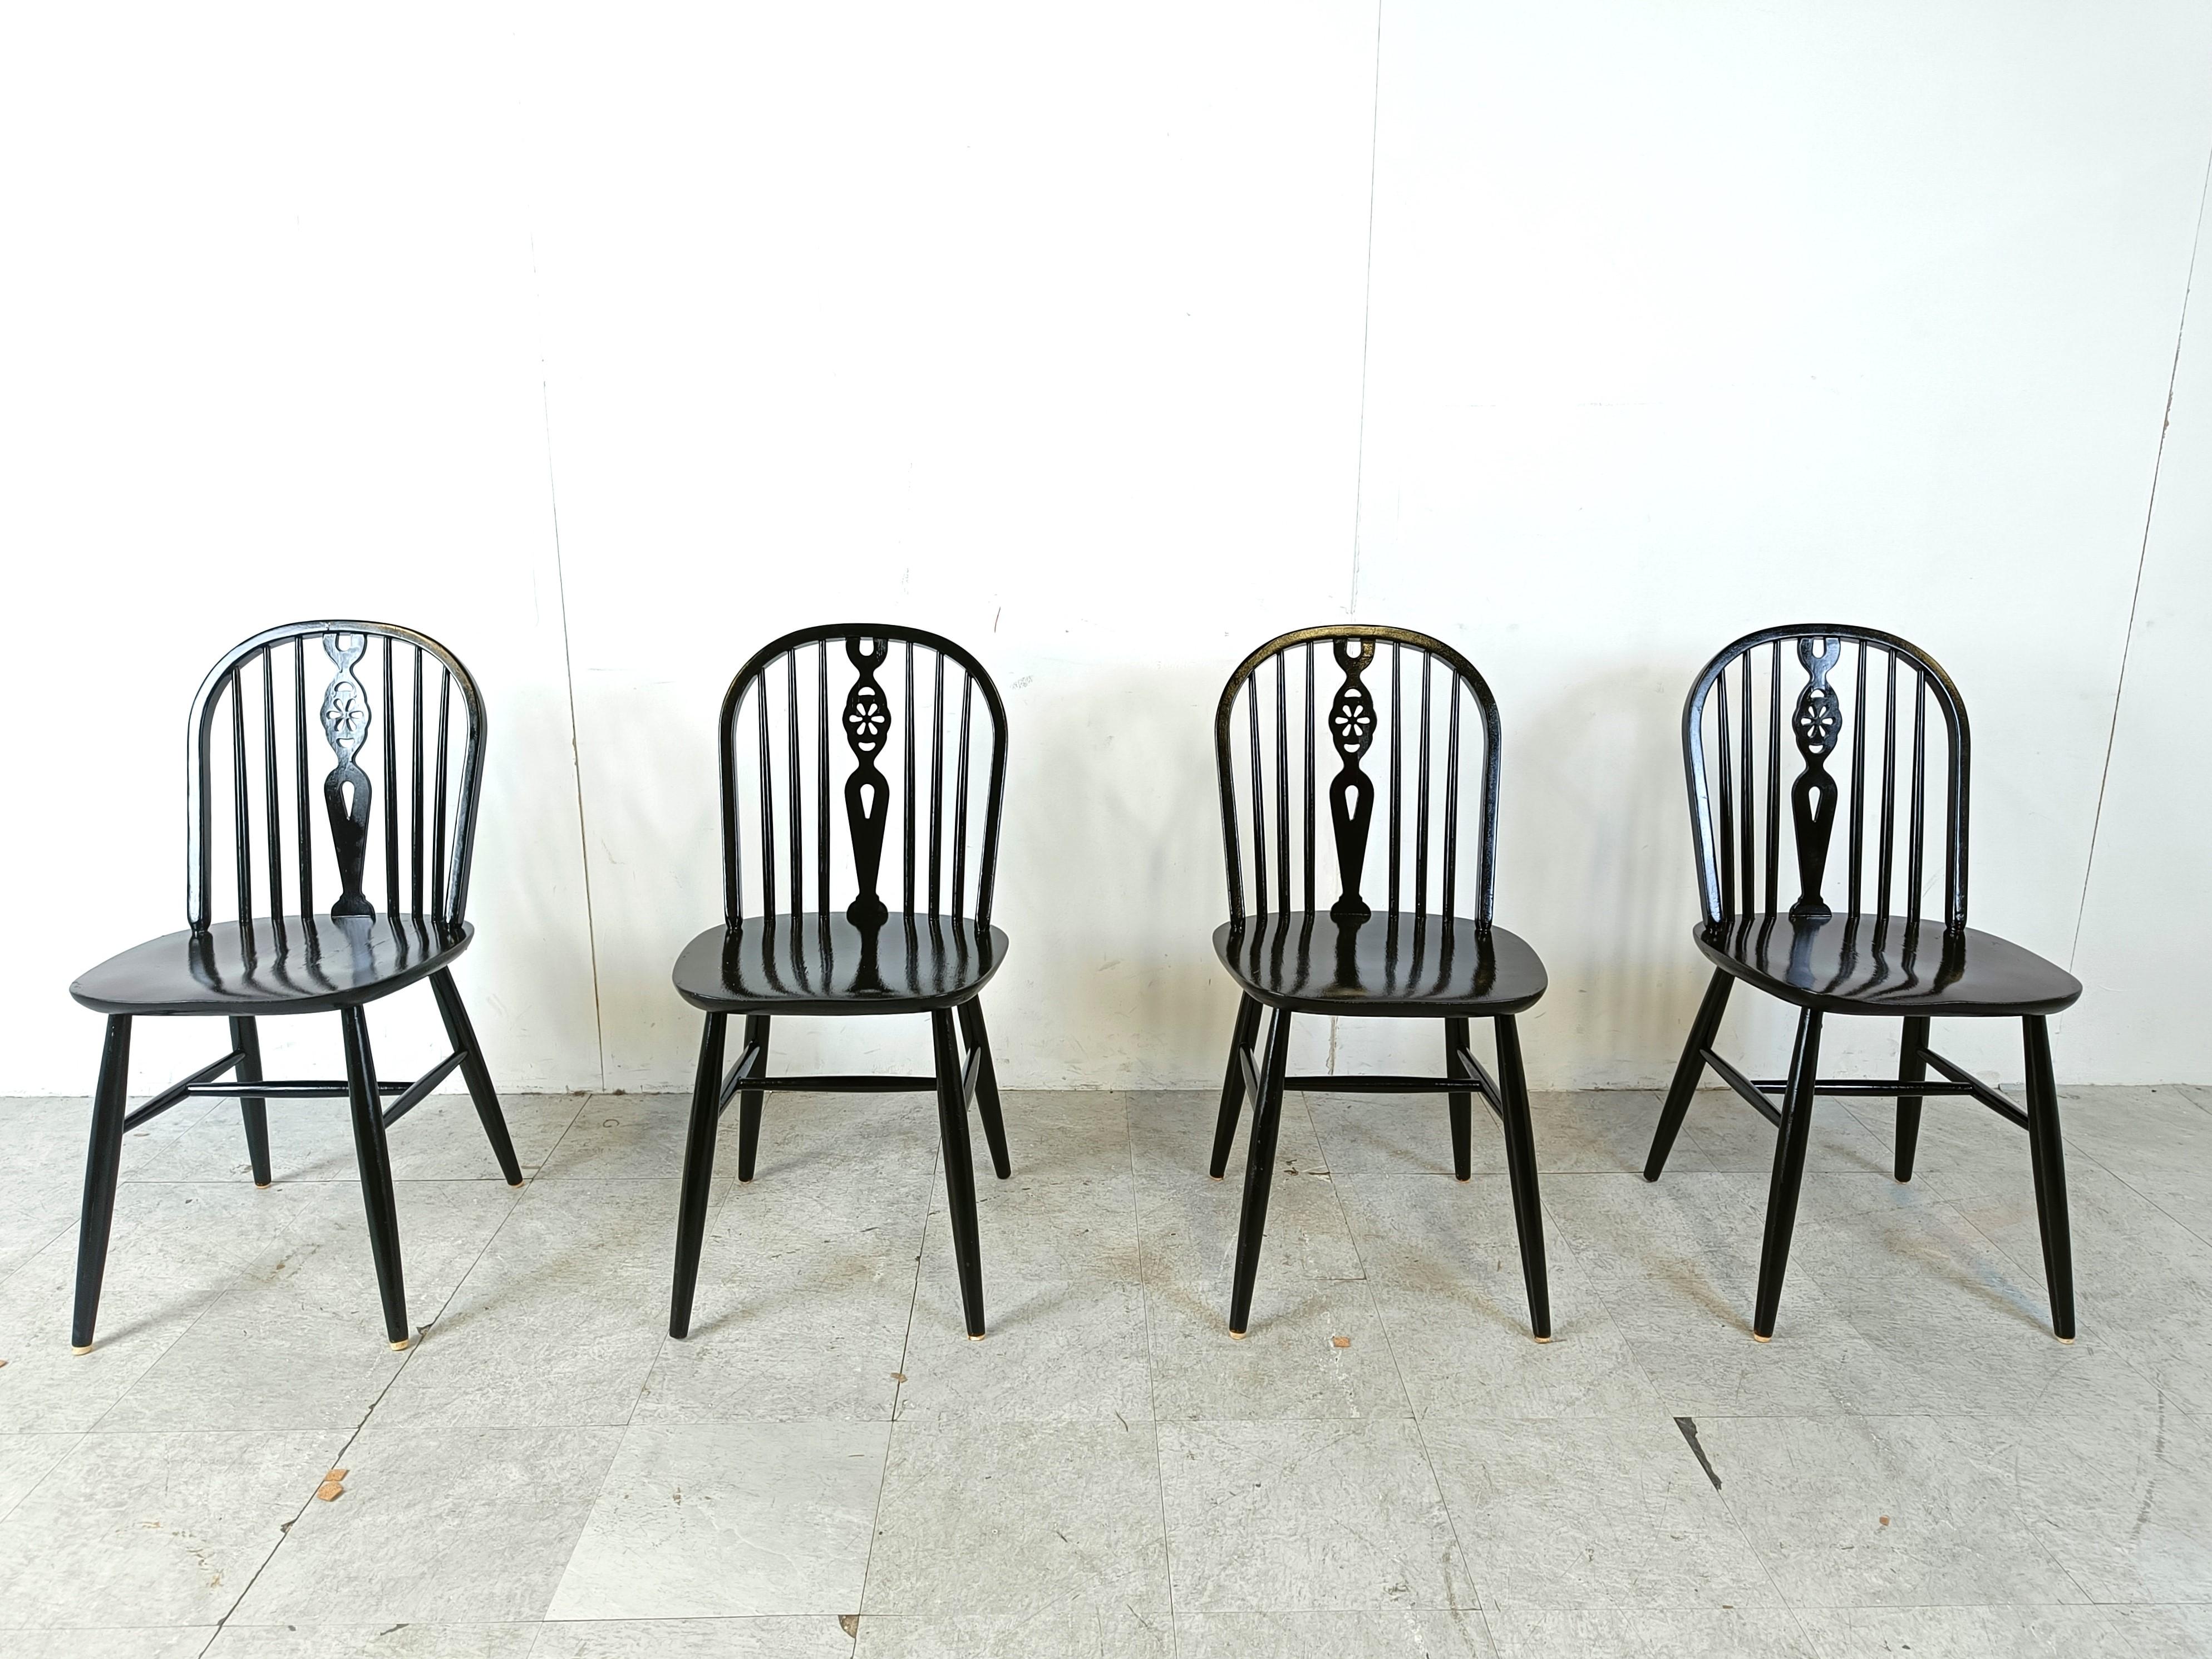 Set of 4 spindle back ercol dining chairs.

The chairs are beautifully crafted with an eye for details and are made of ebonized wooden frames.

Timeless pieces that gives an antique/vintage touch to your interior which mixes well with modern day